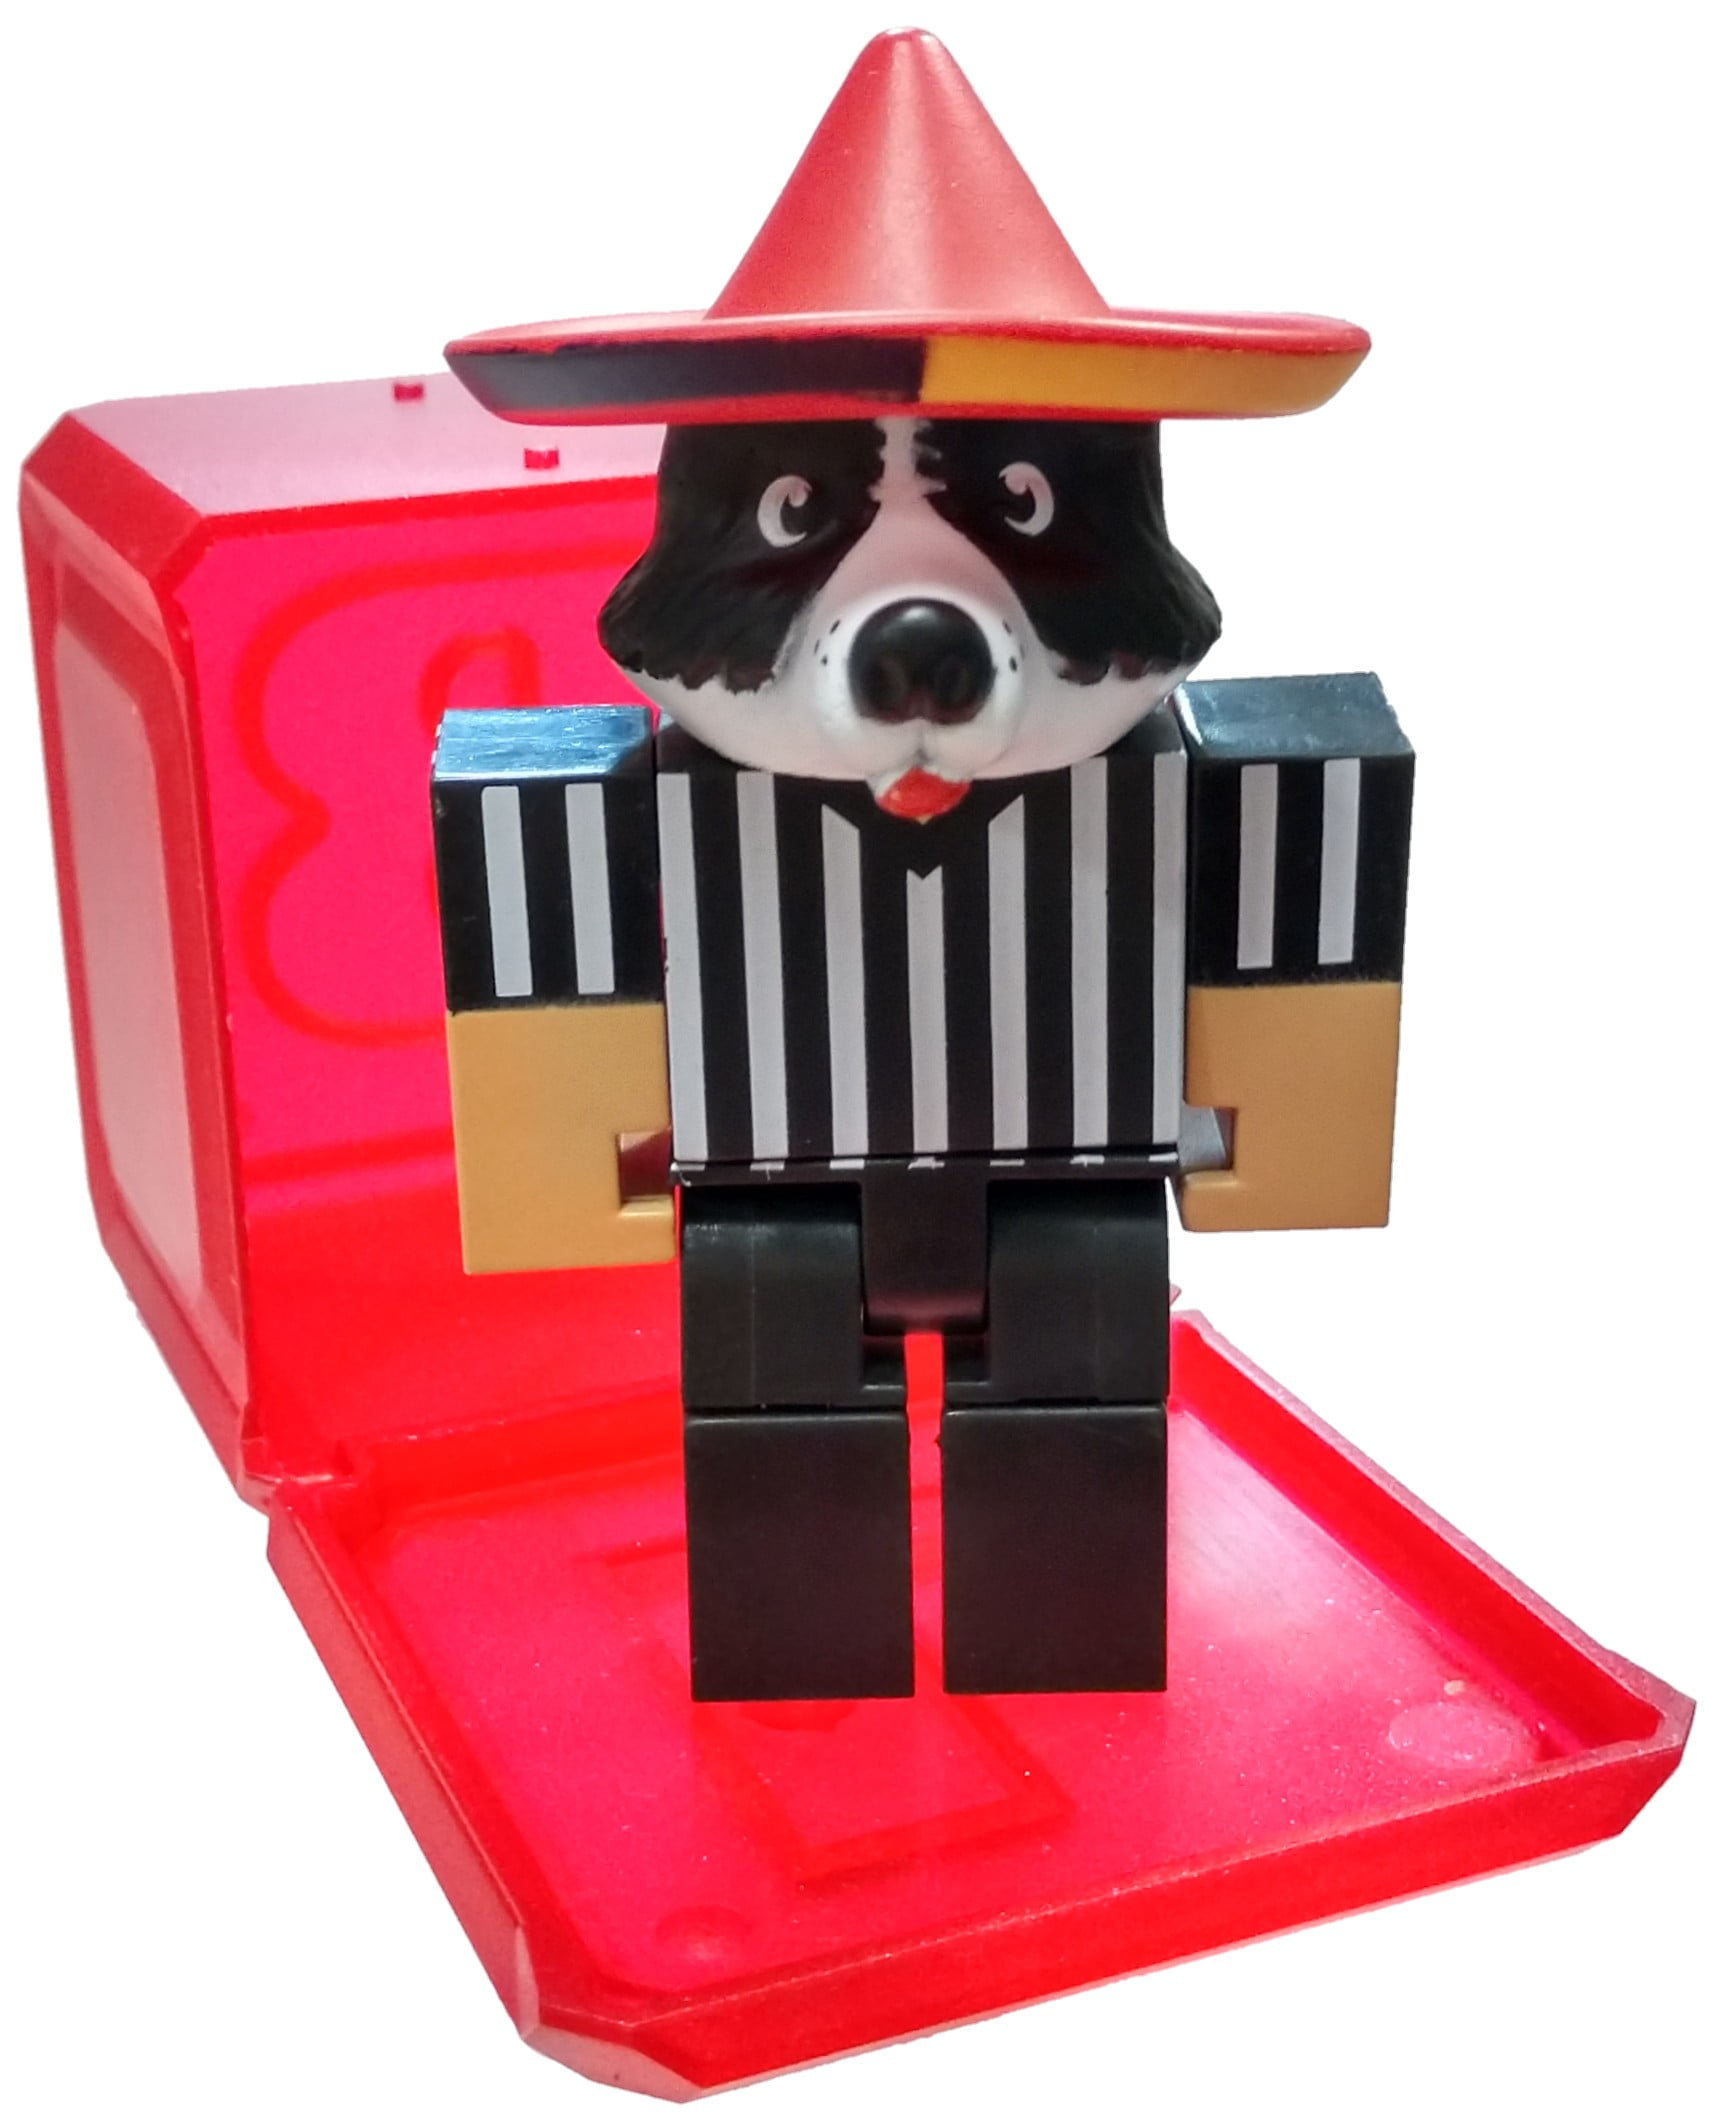 Roblox Celebrity Collection Series 5 High School Life Referee Mini Figure With Red Cube And Online Code No Packaging Walmart Com Walmart Com - high school life fights roblox